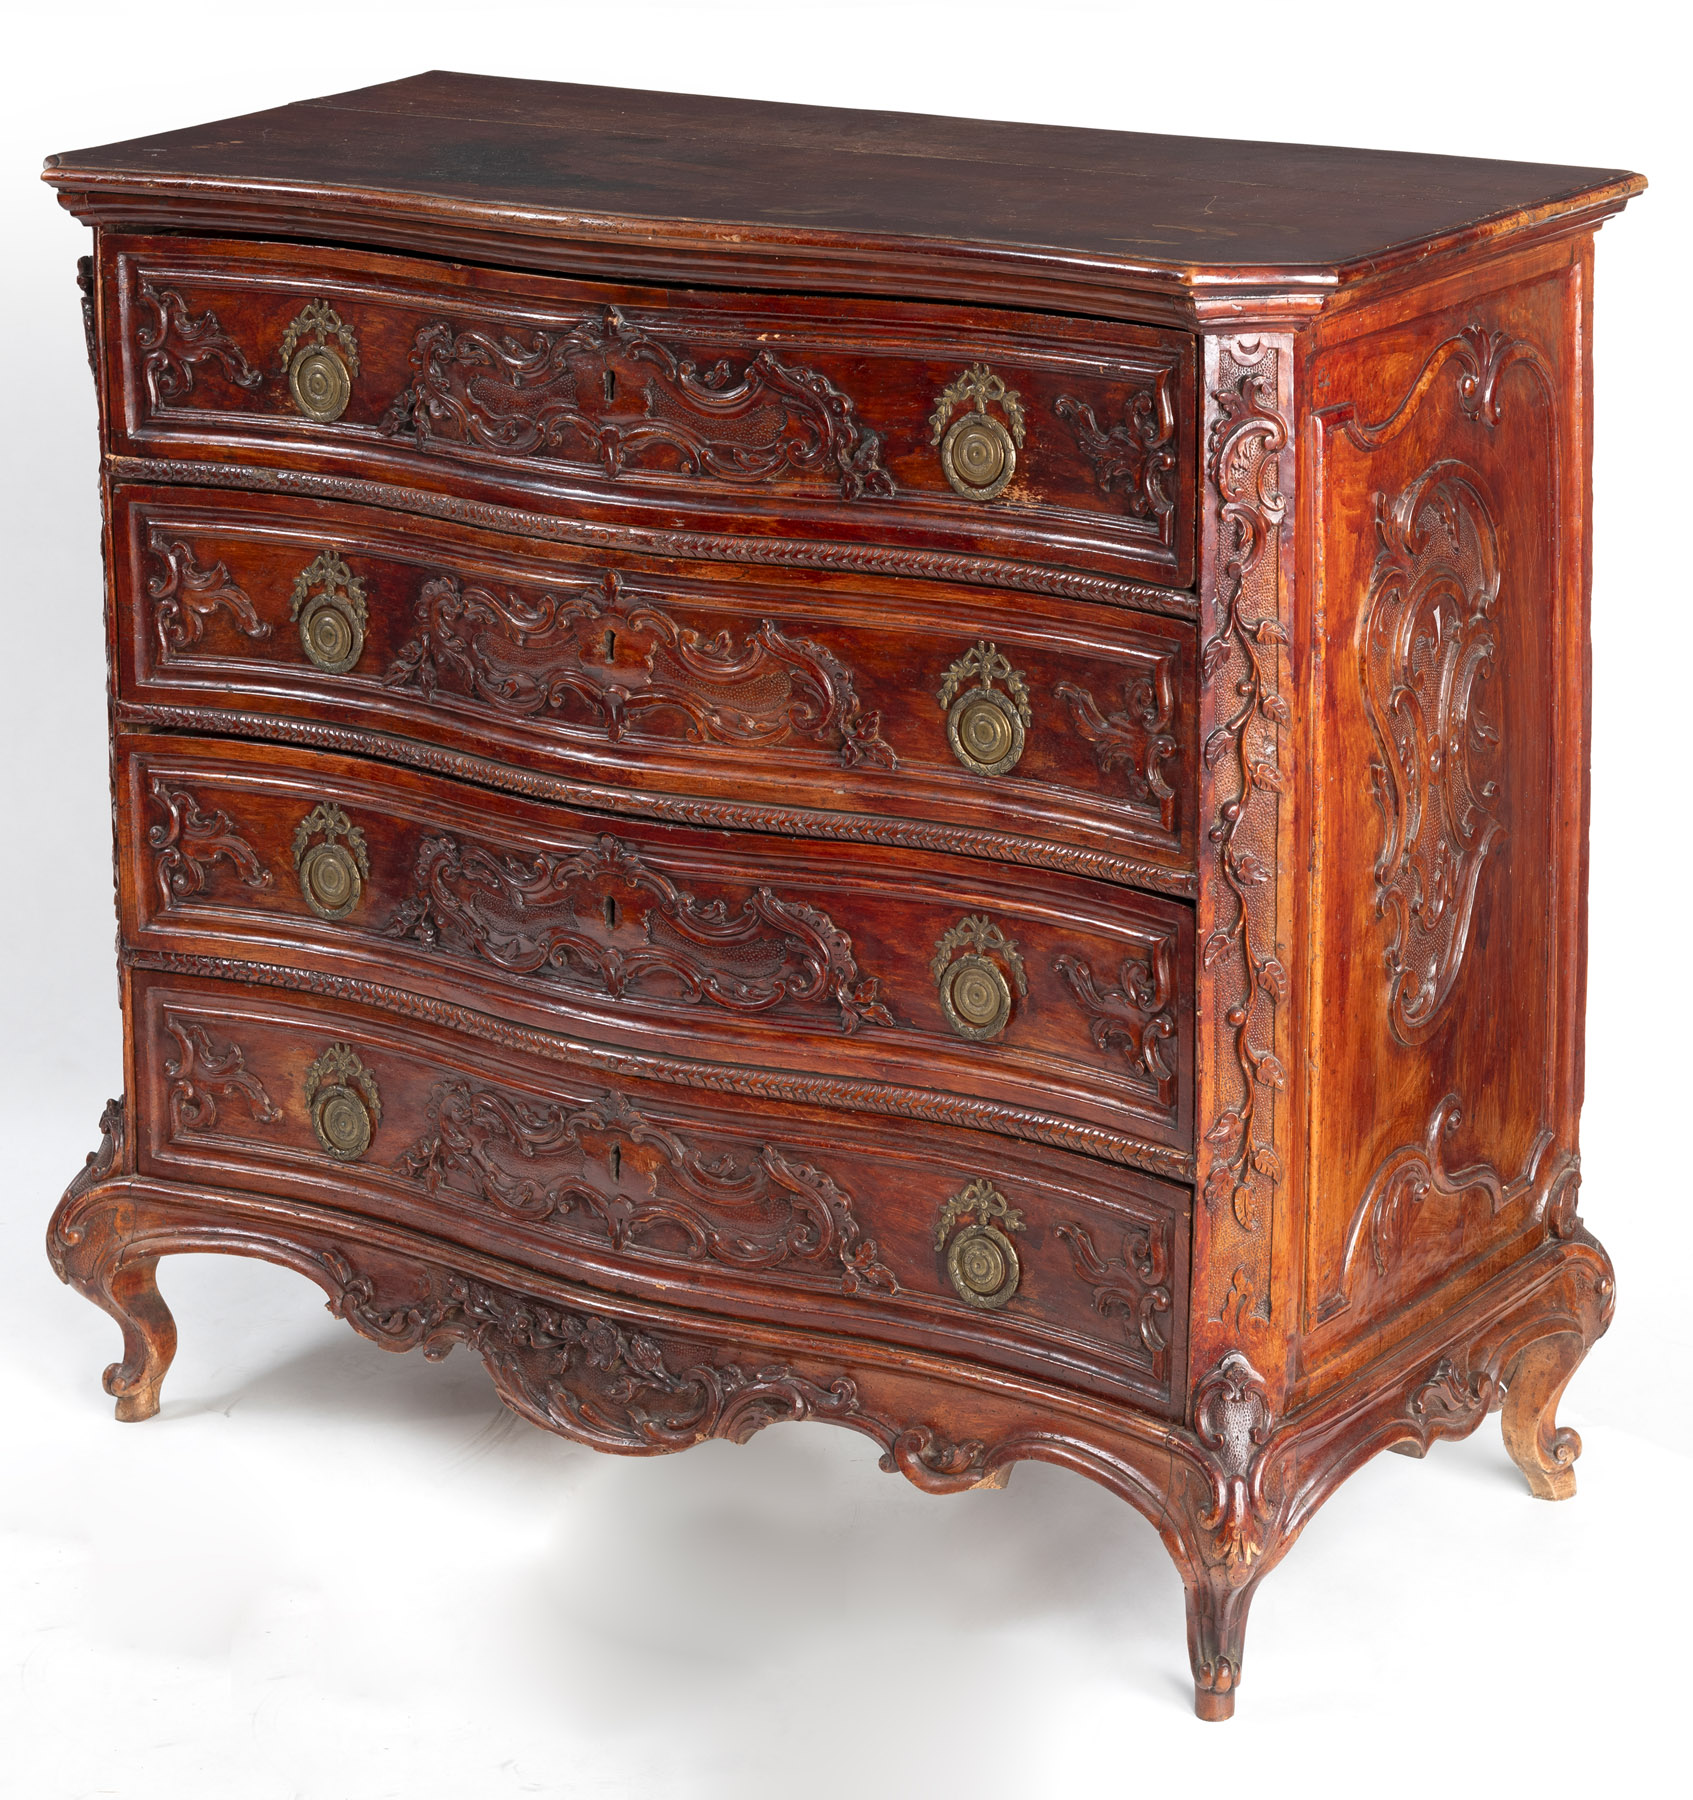 A LARGE BRASS MOUNTED CARVED WALNUT ROCOCO COMMODE - Image 7 of 7